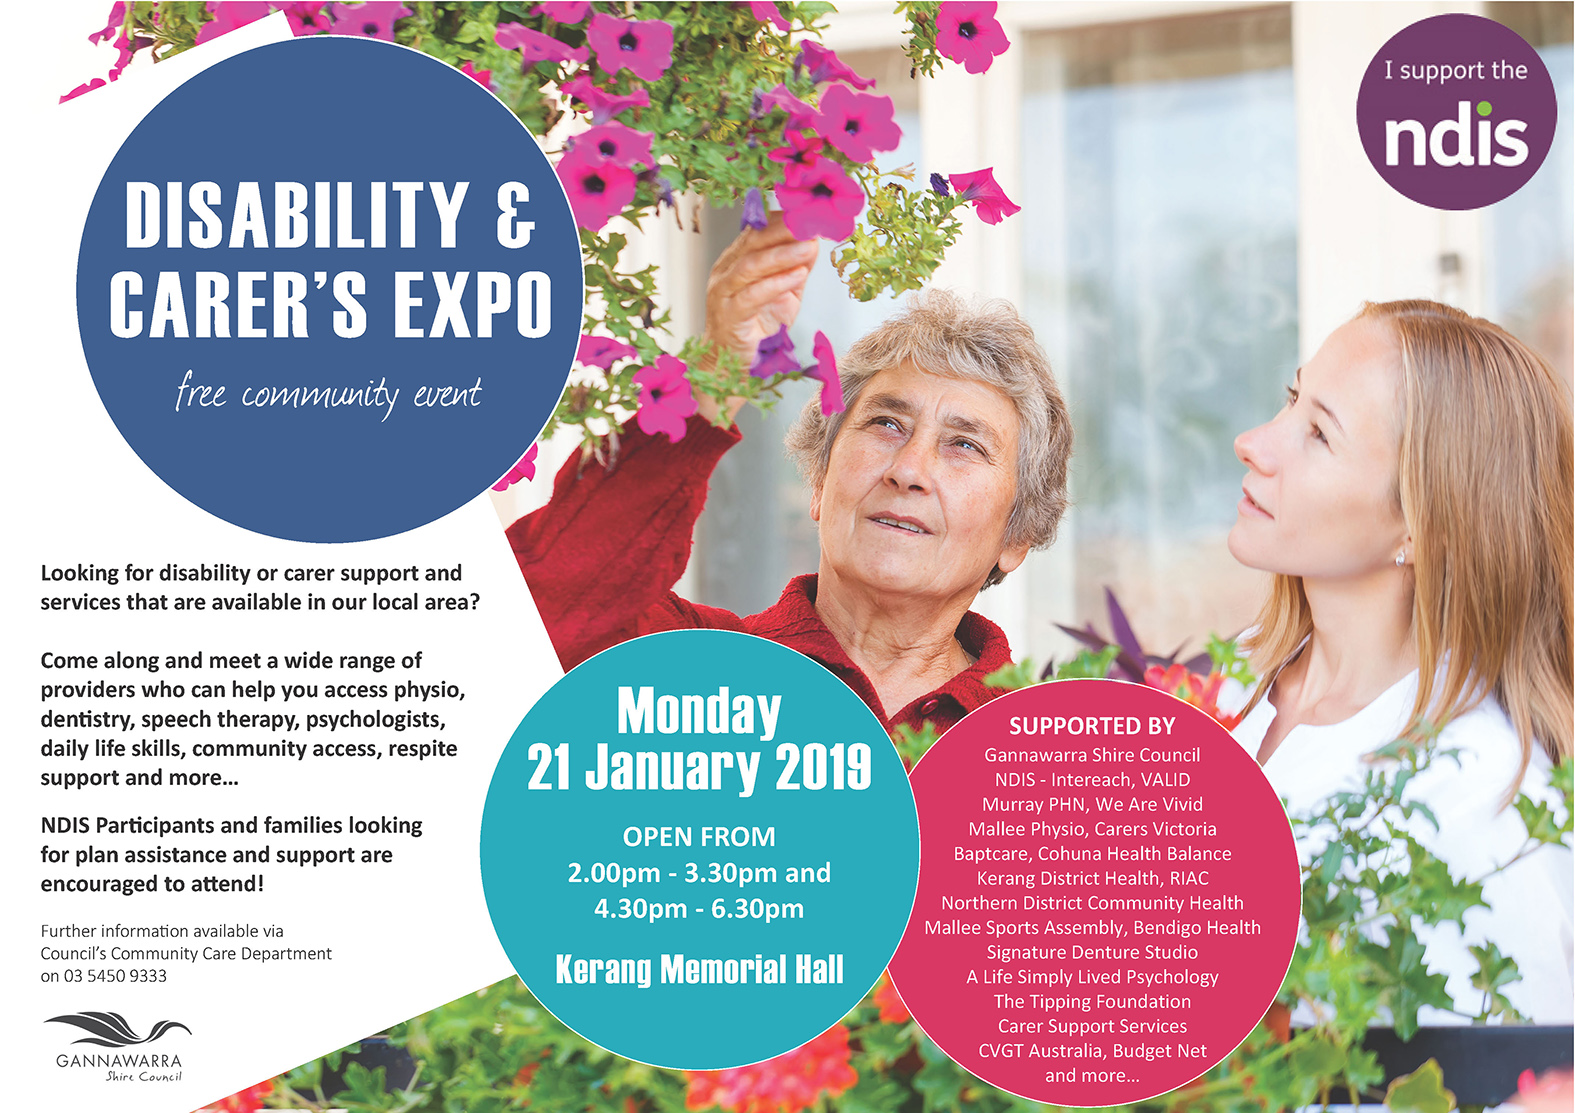 Disability & Carers Expo Flyer FINAL.jpg